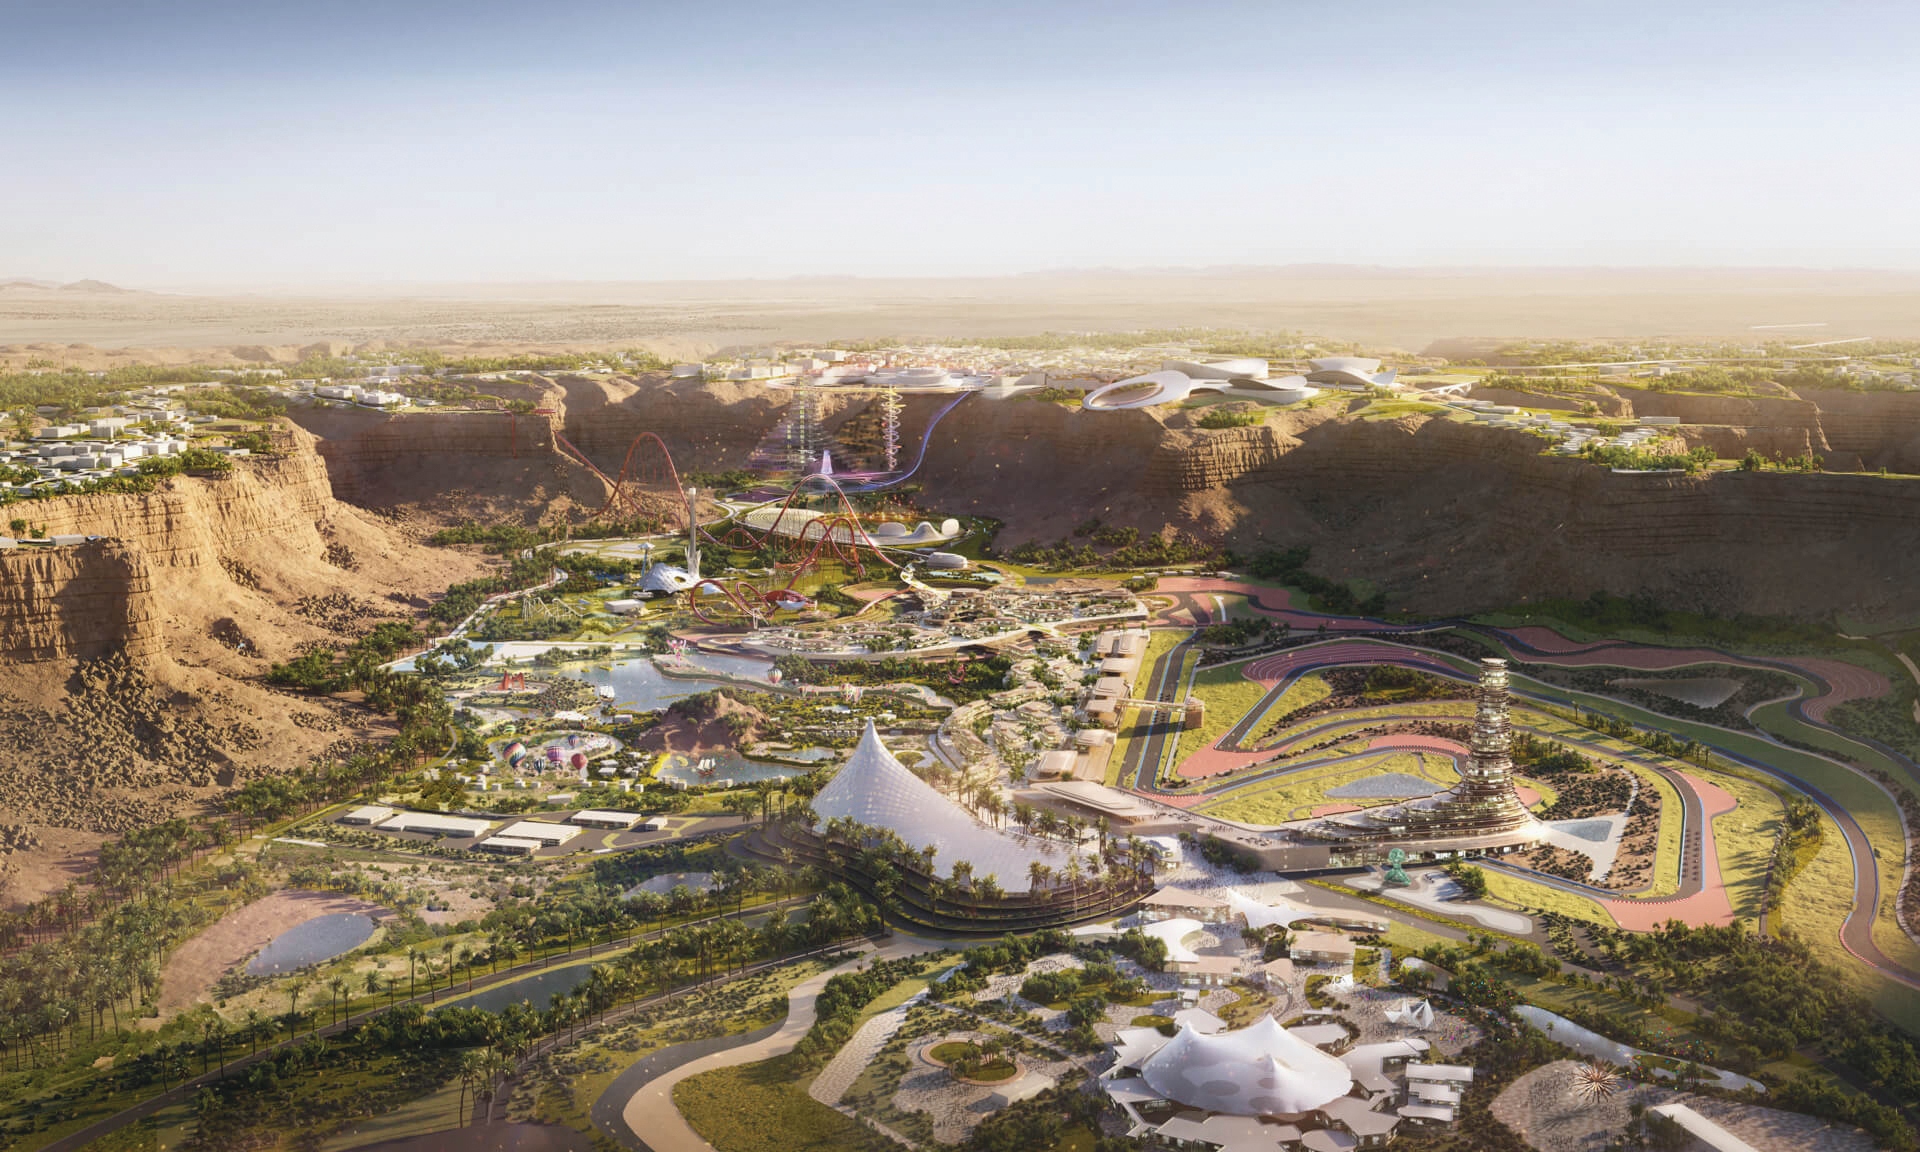 Qiddiya Project, the capital of entertainment in Saudi Arabia with the world's record-breaking theme park